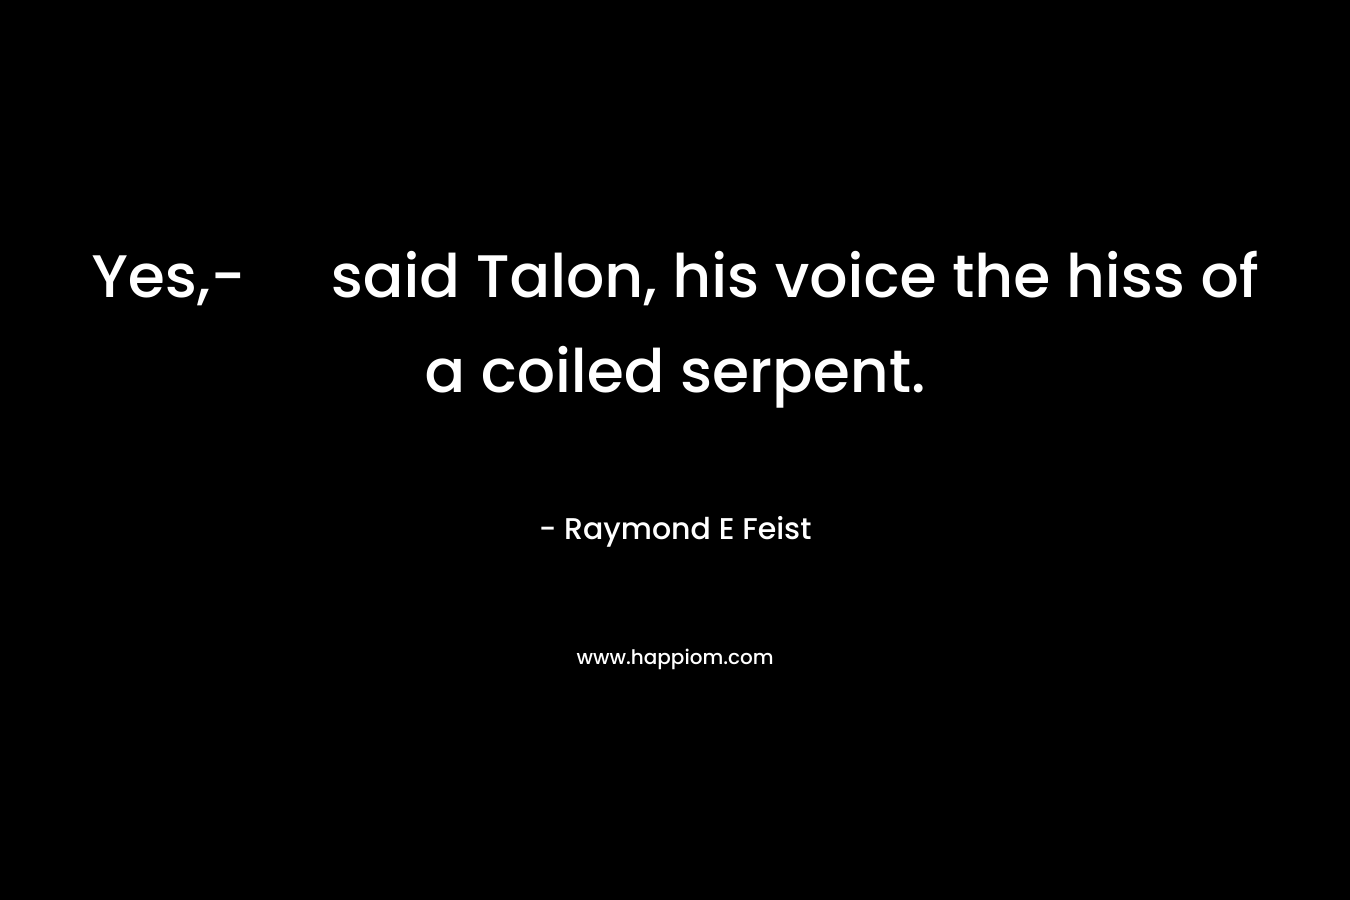 Yes,- said Talon, his voice the hiss of a coiled serpent.